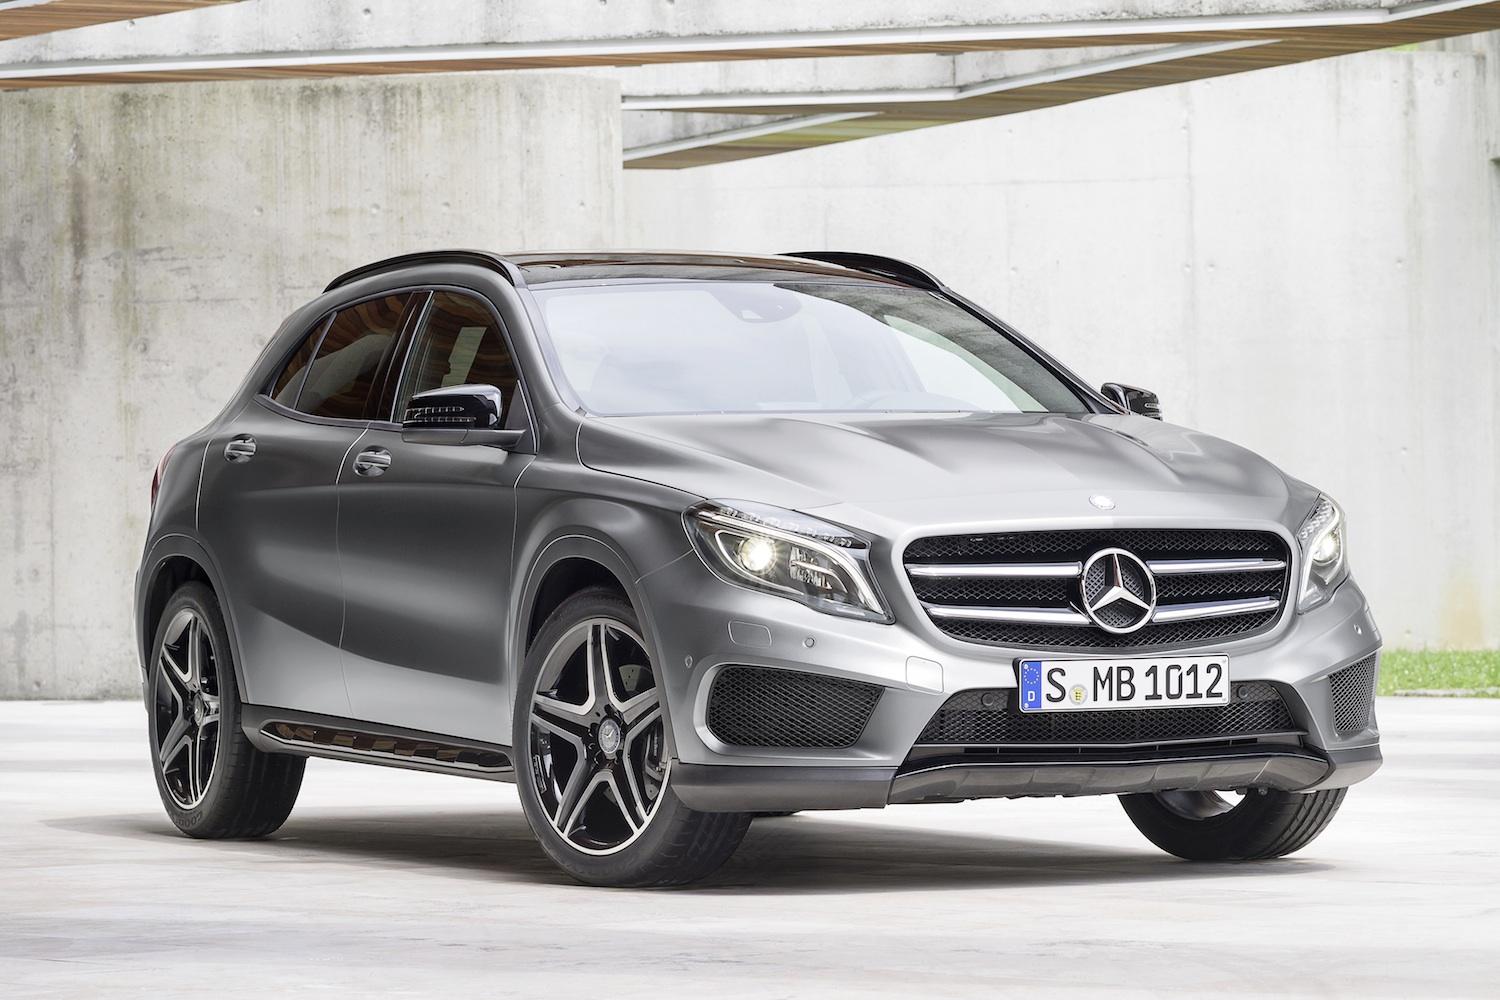 The 2015 Mercedes-Benz GLA is the epitome of the car of the future